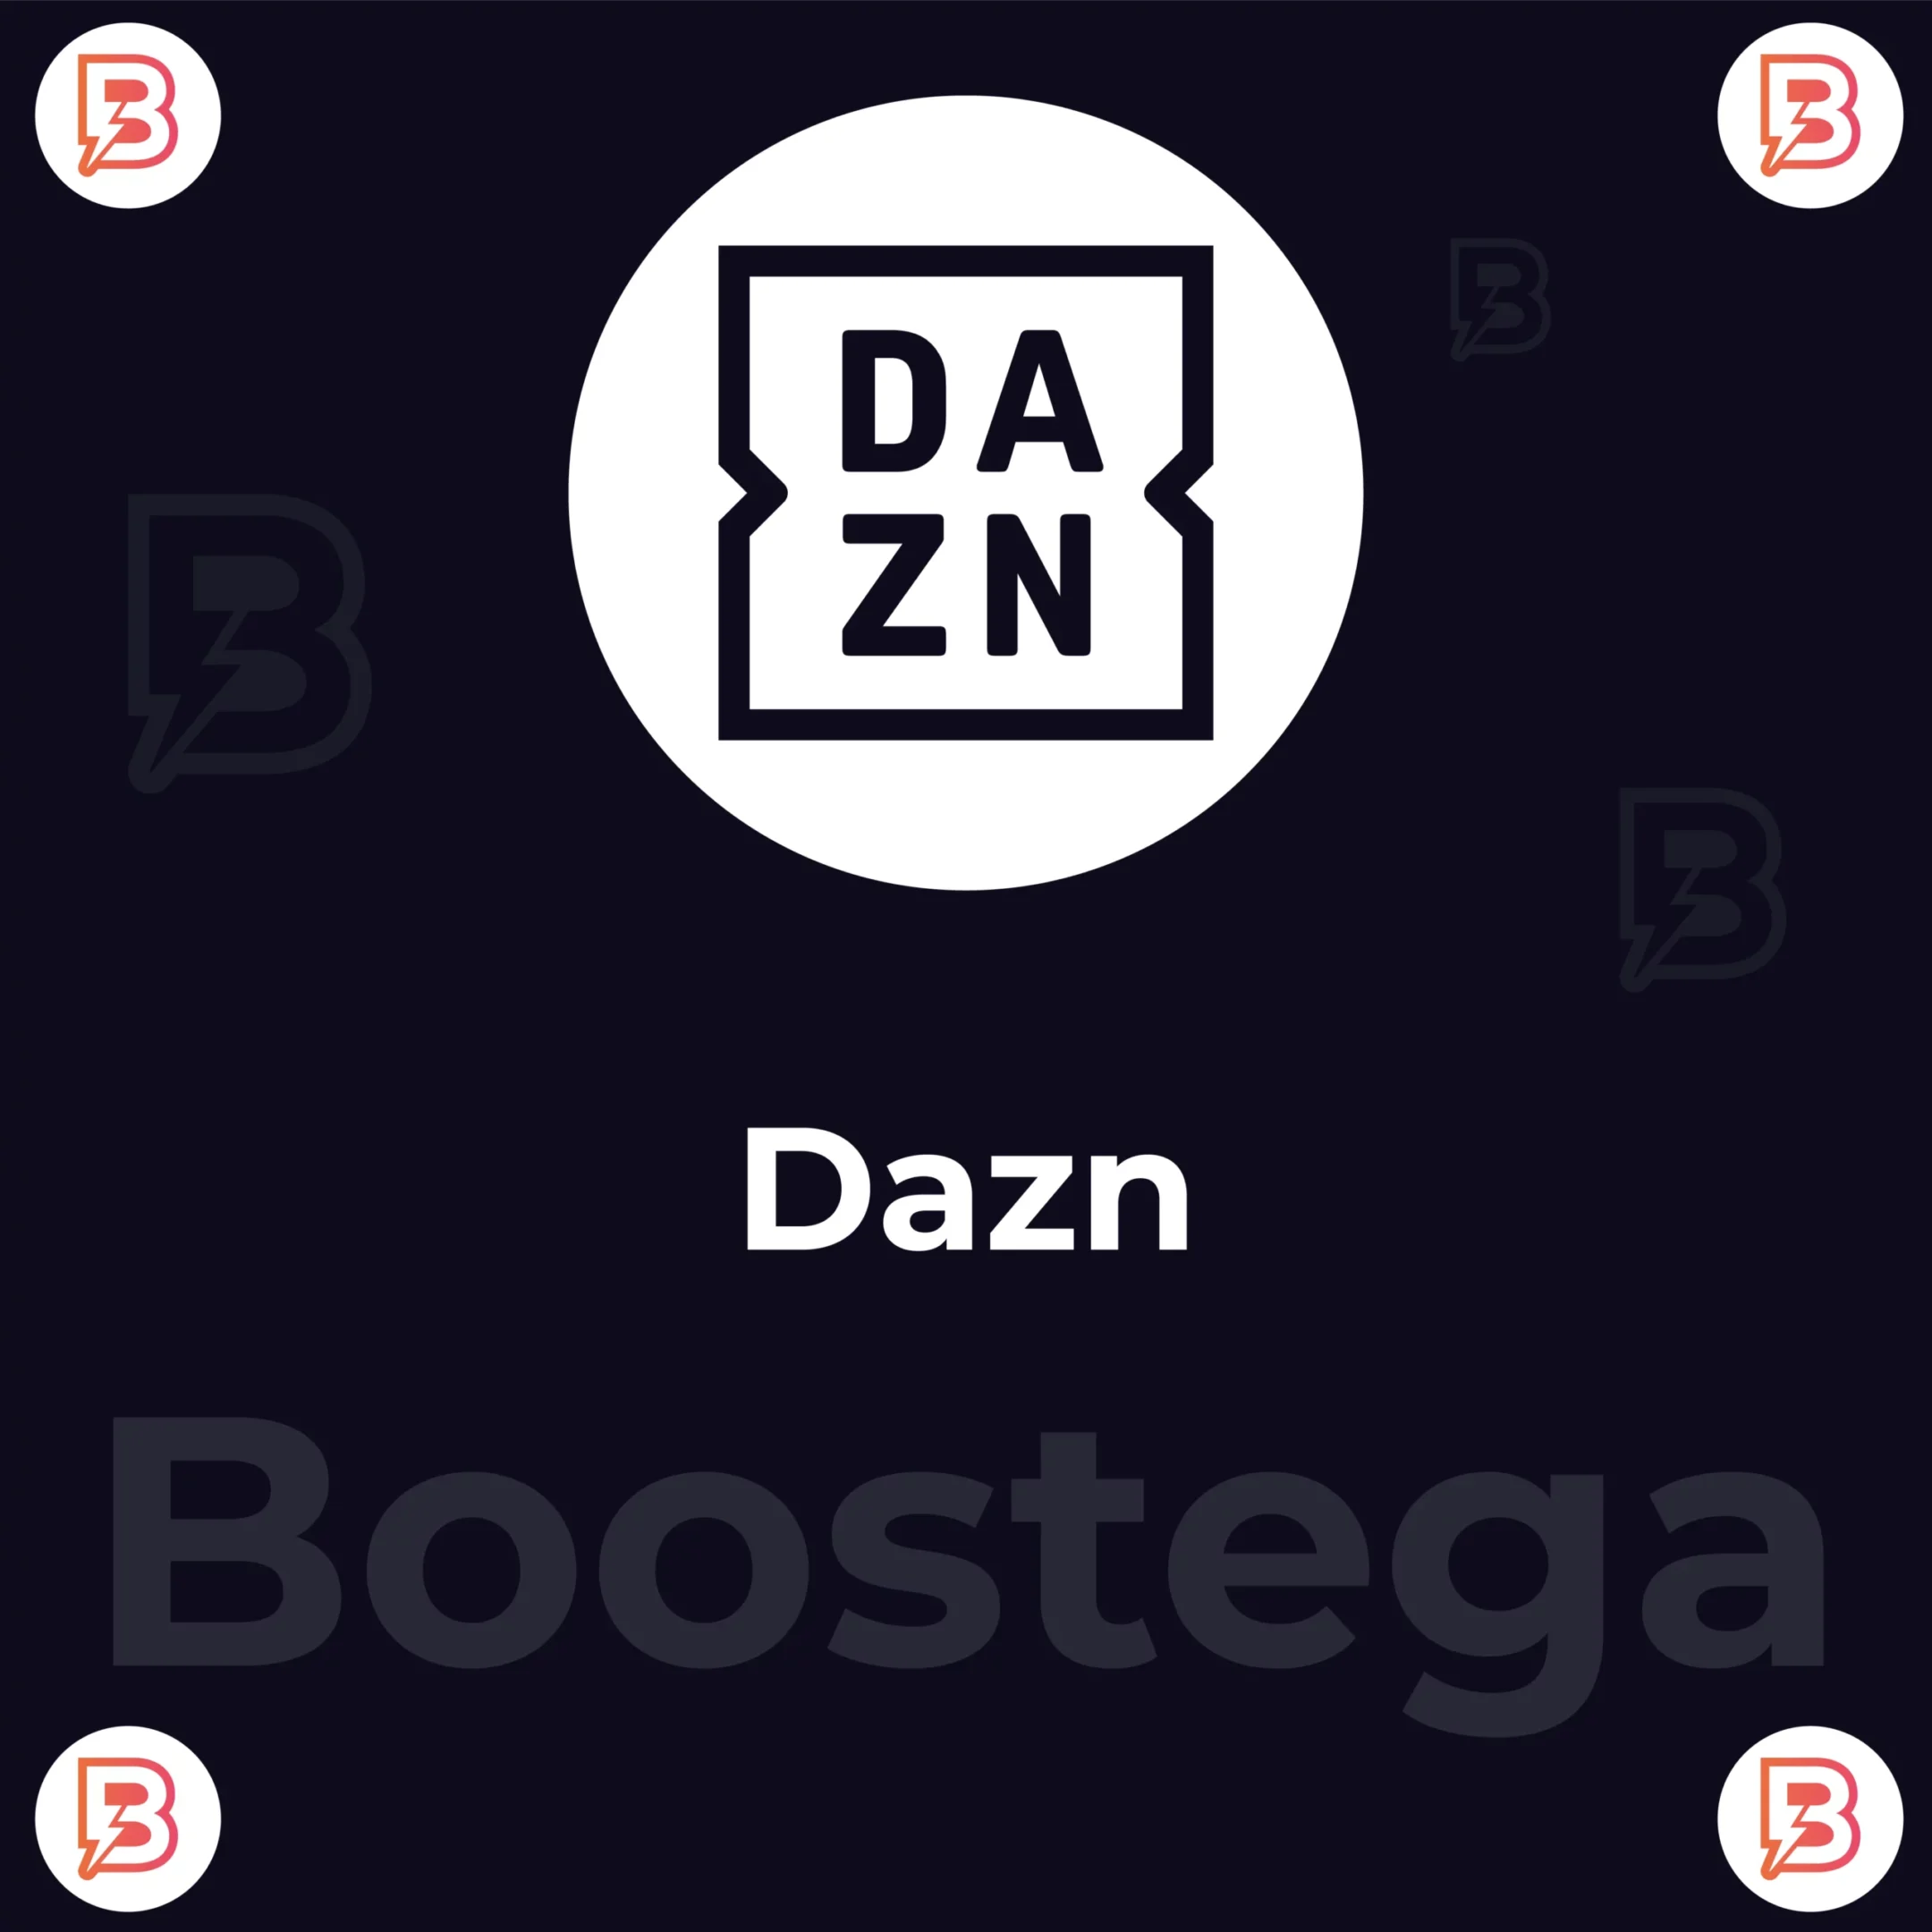 Buy Dazn Premium Account at Boostega Benefit from our lifetime guarantee, lowest prices, and easy buy-now options, All In One Digital Store